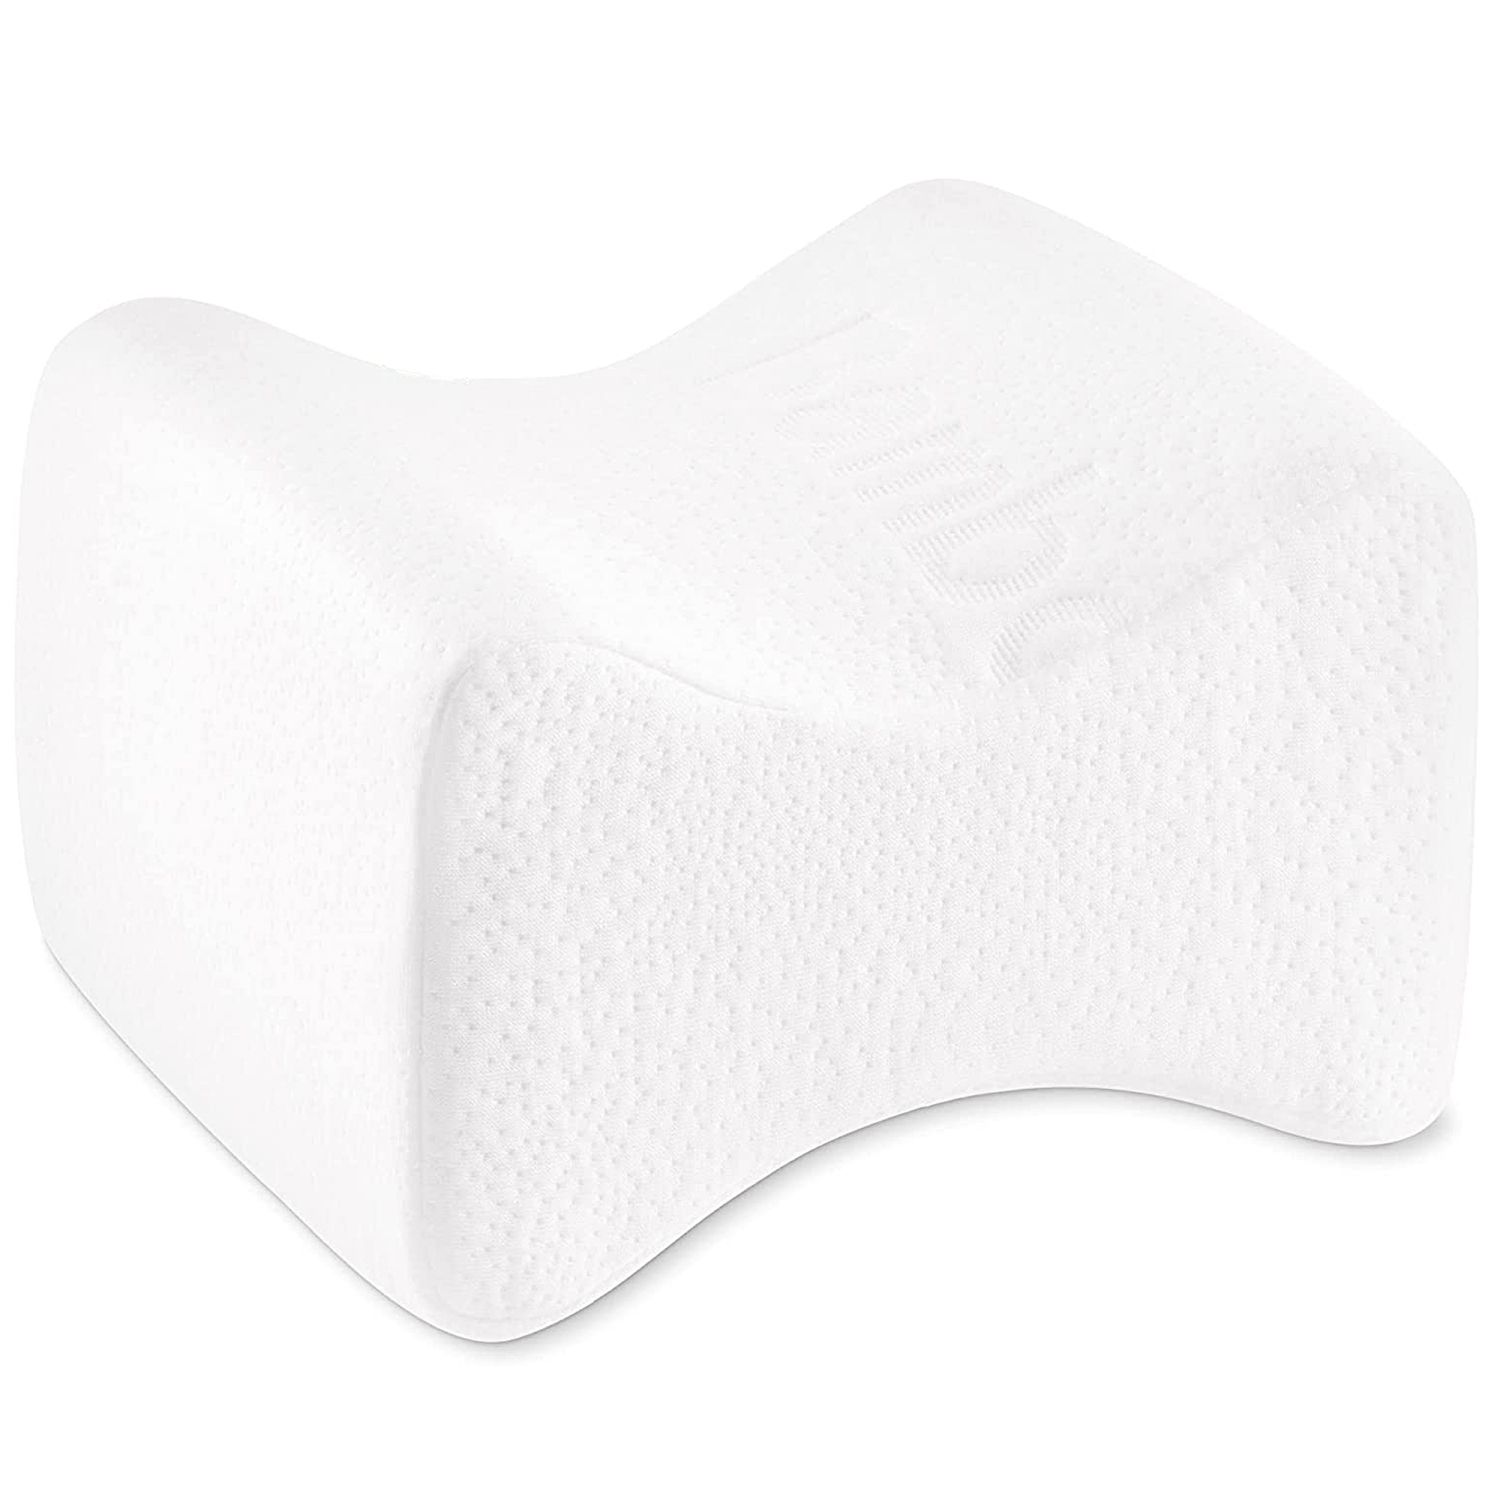 Sealy Elite Extra Firm Maintains Shape Foam Core Support Pillow